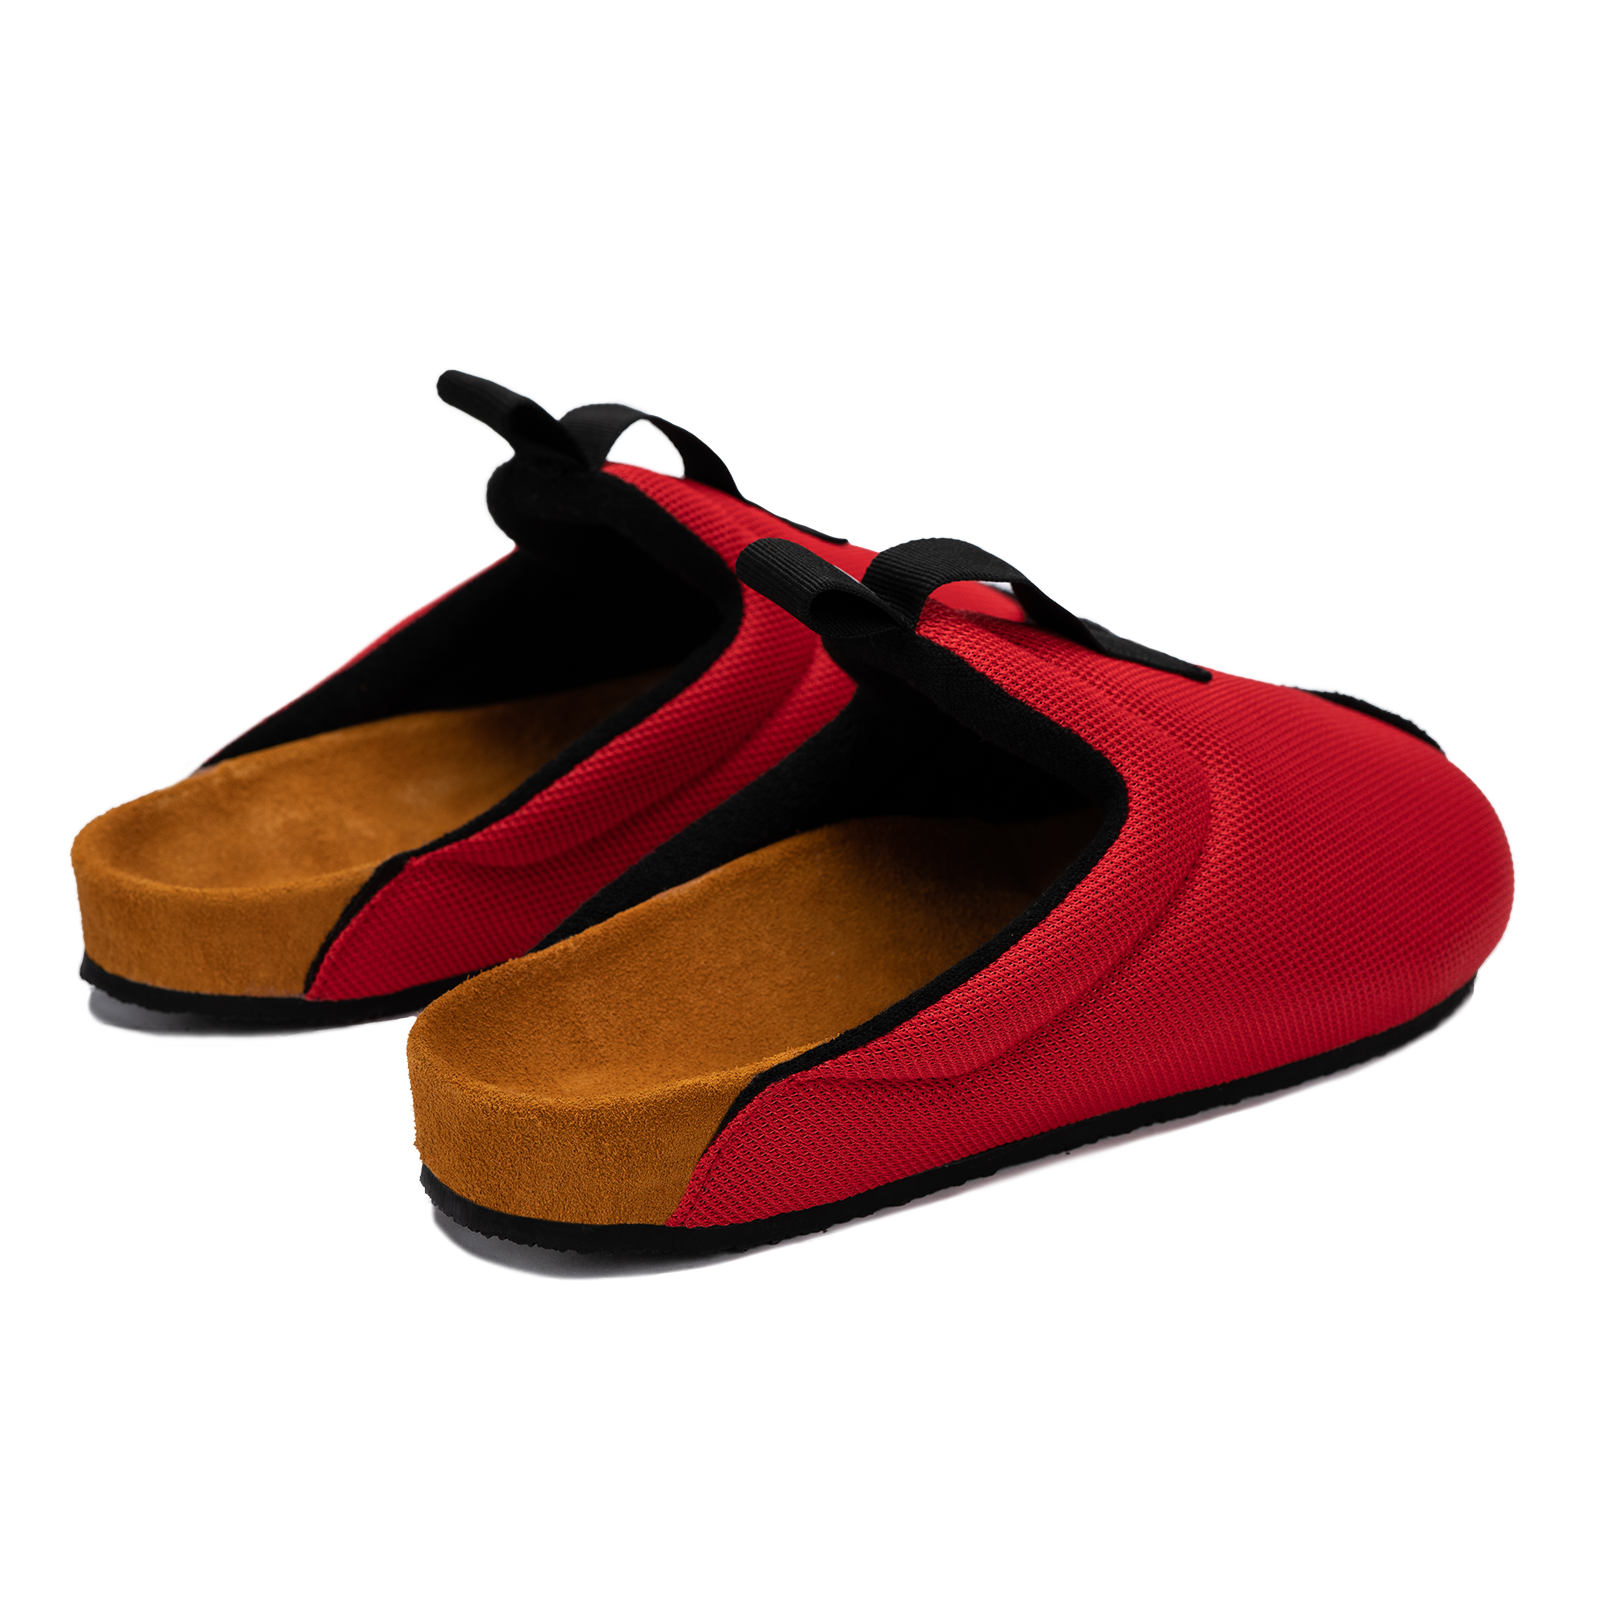 Back 3/4 view antha 2.0 Red is a Mule made of red mesh with a Black hairy suede to overlay, cork midsole with suede top lining Black VIbram rubber bottom and woven top pull